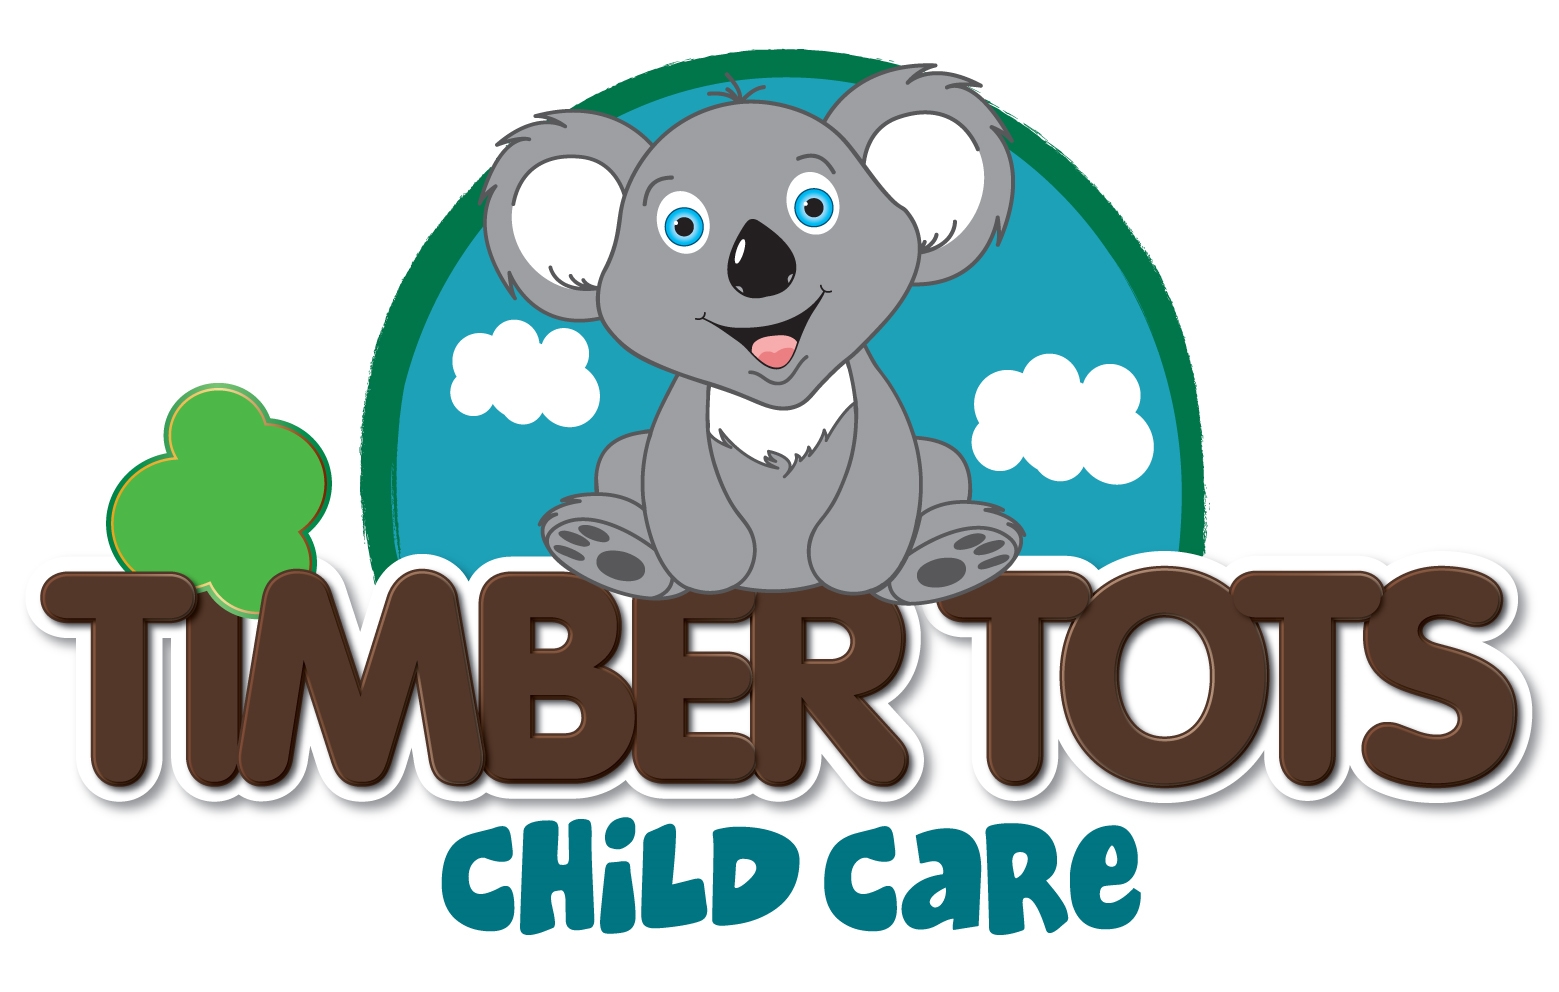 Timber Tots Child Care